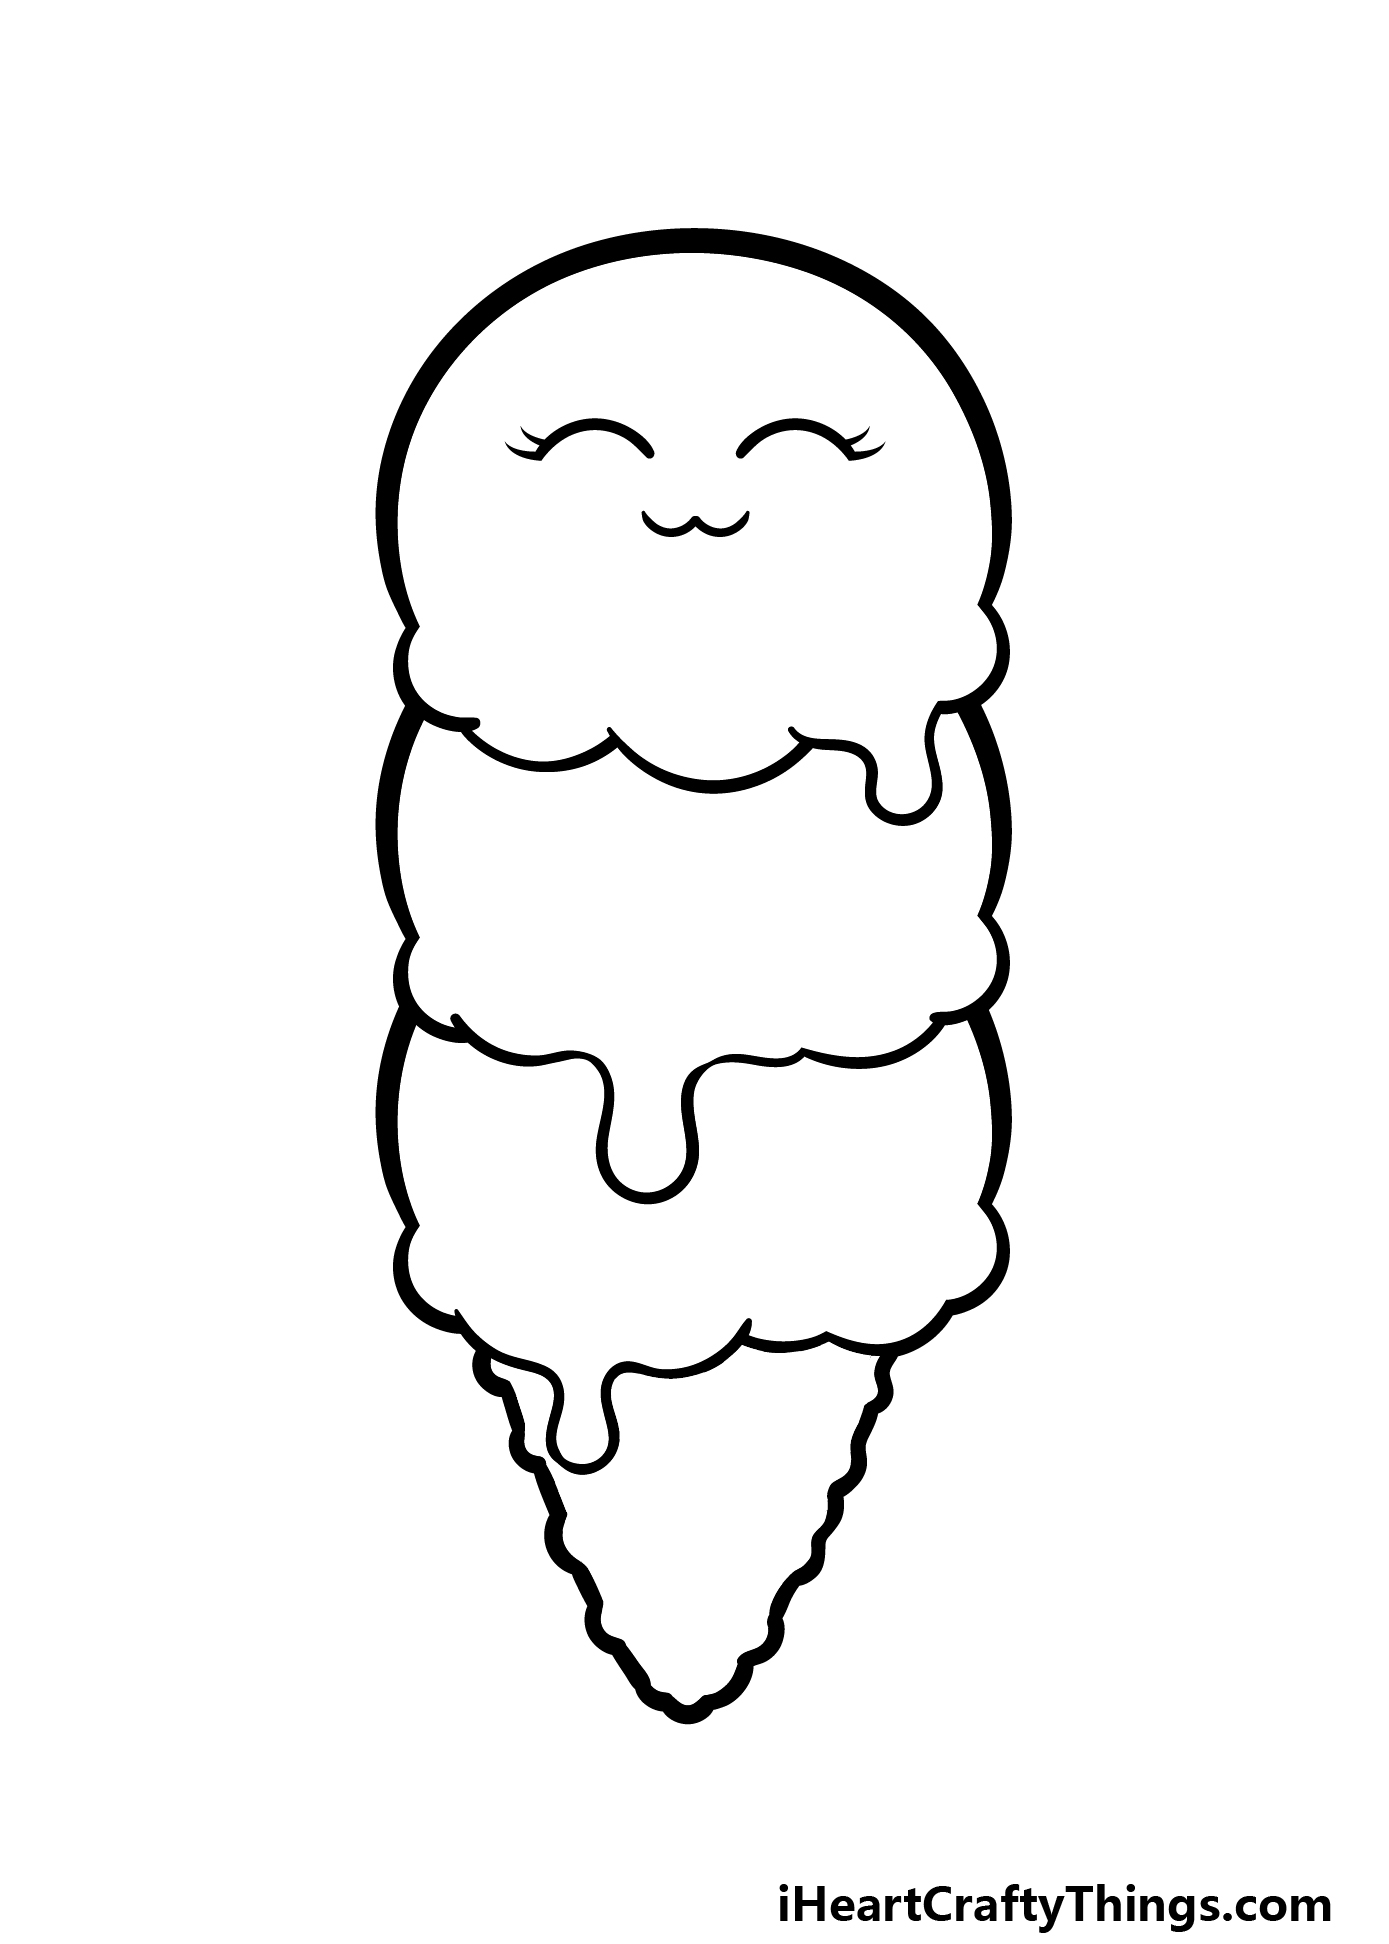 Ice Cream Cone Drawing Images - Free Download on Freepik-anthinhphatland.vn